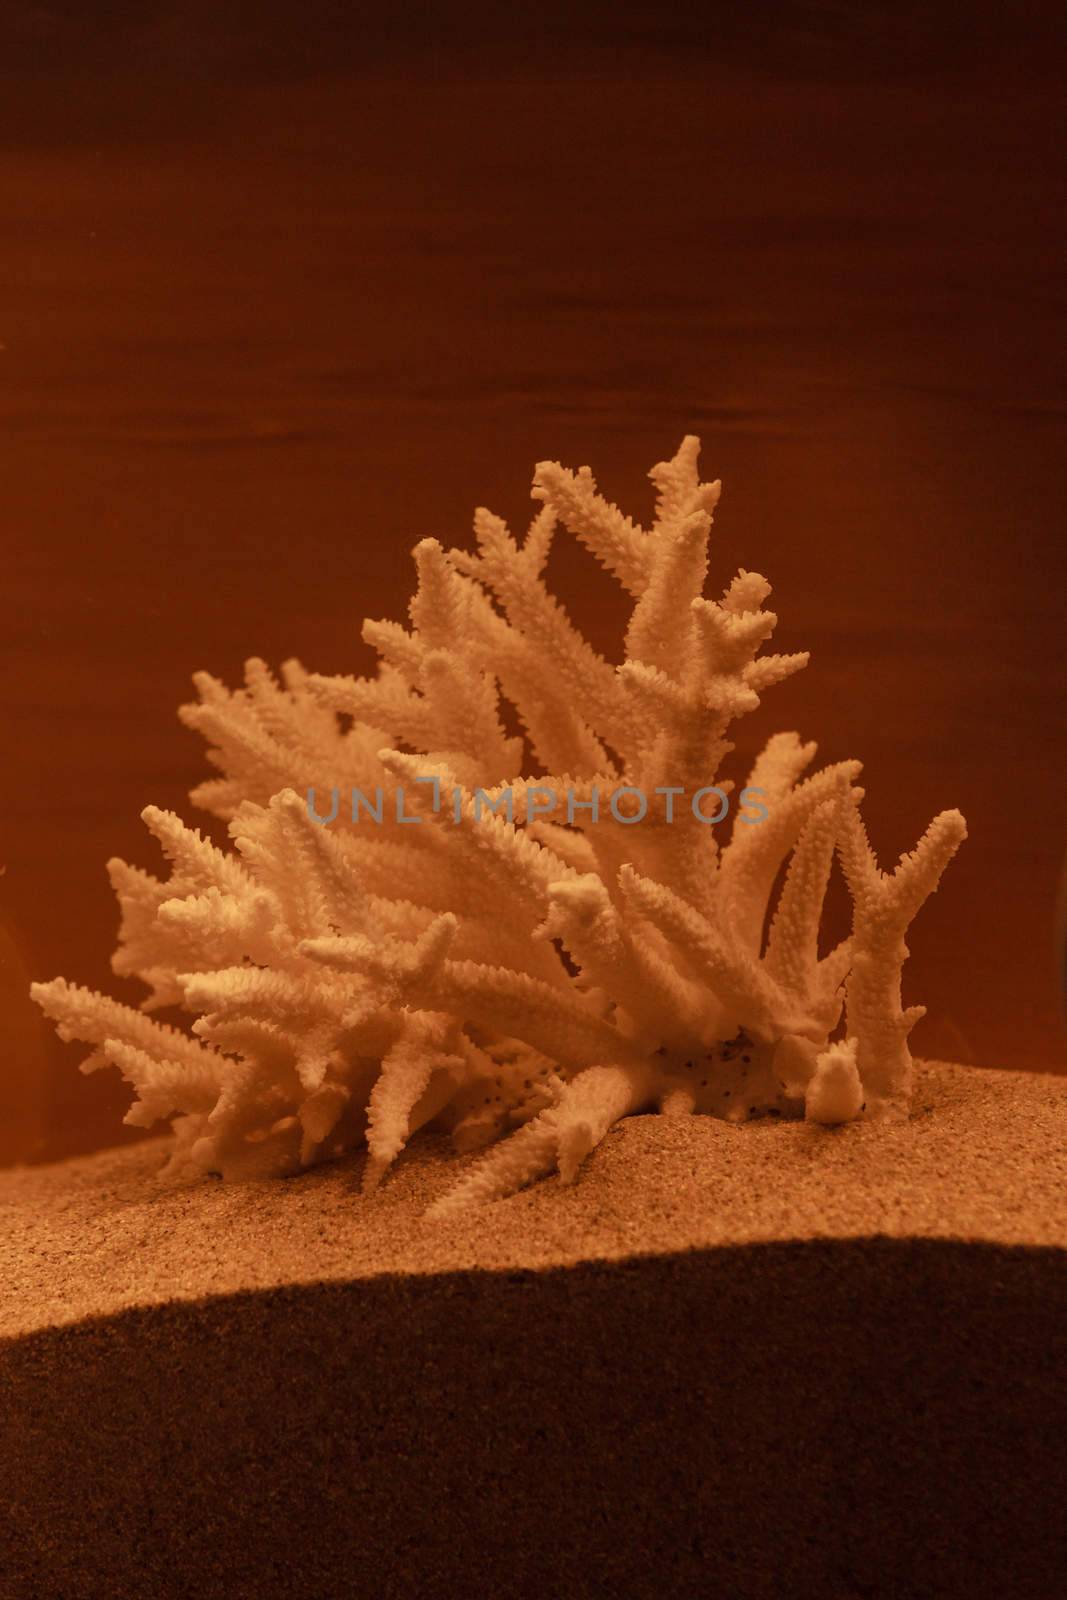 Bleached coral skeleton decor on a bronzed background